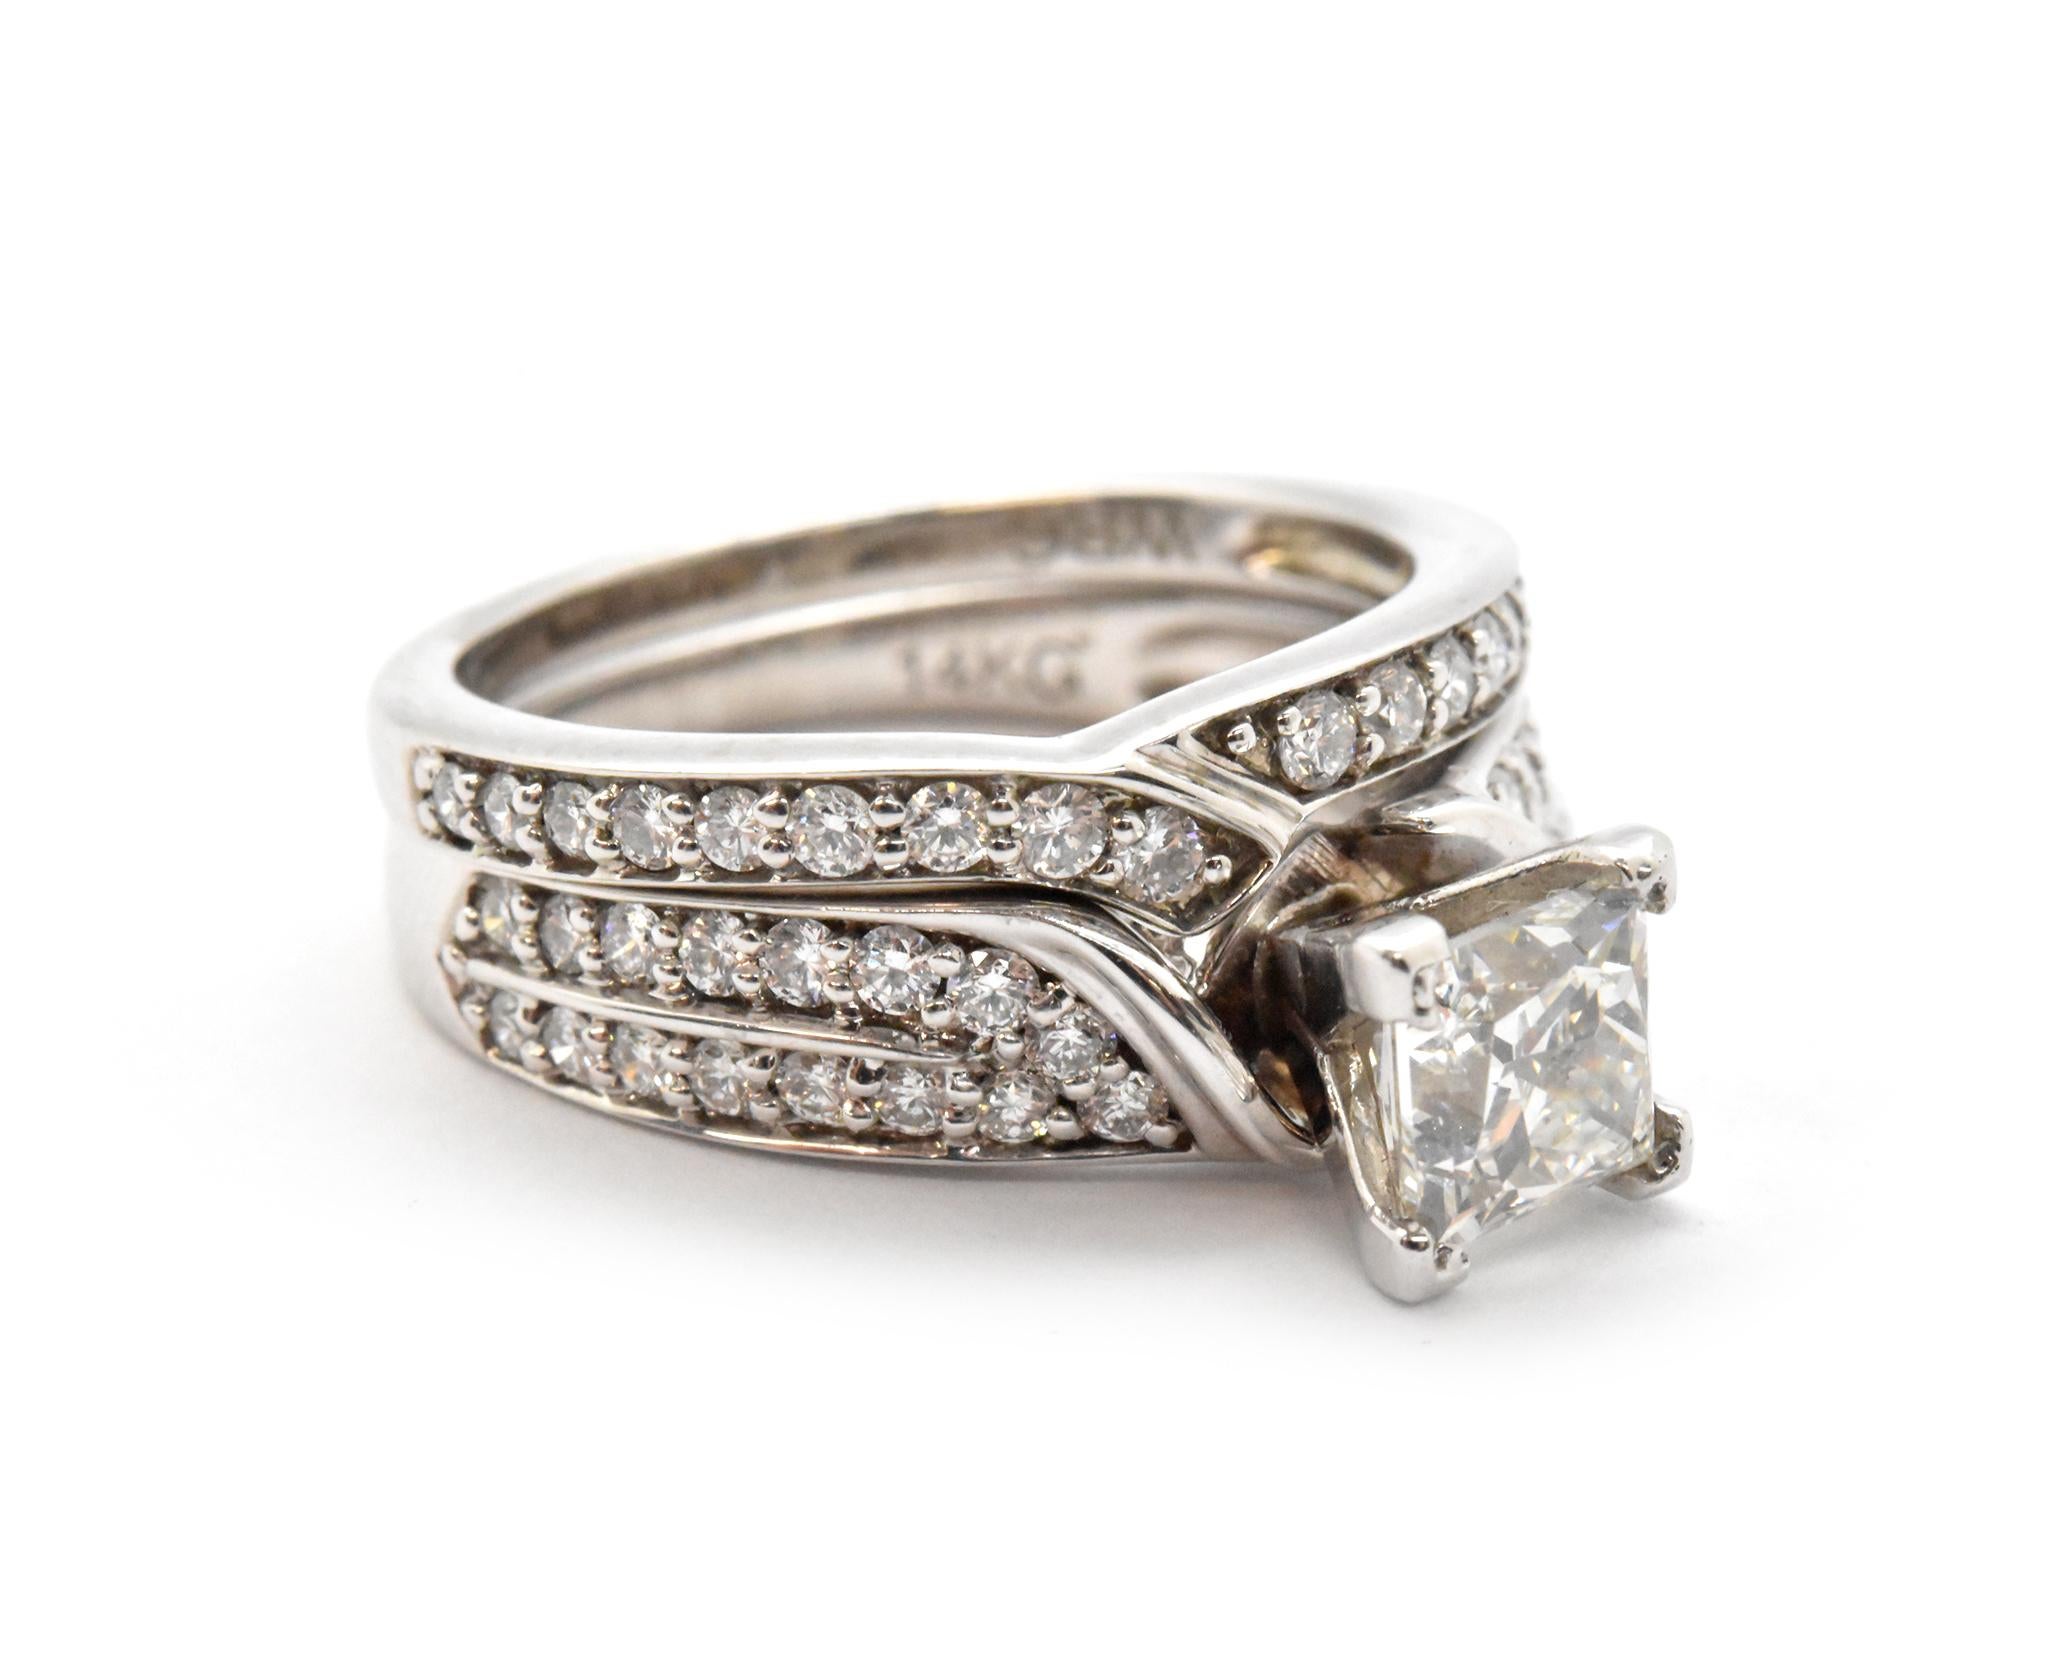 Shown is a wedding set crafted in 14k white gold. The engagement ring features a princess 